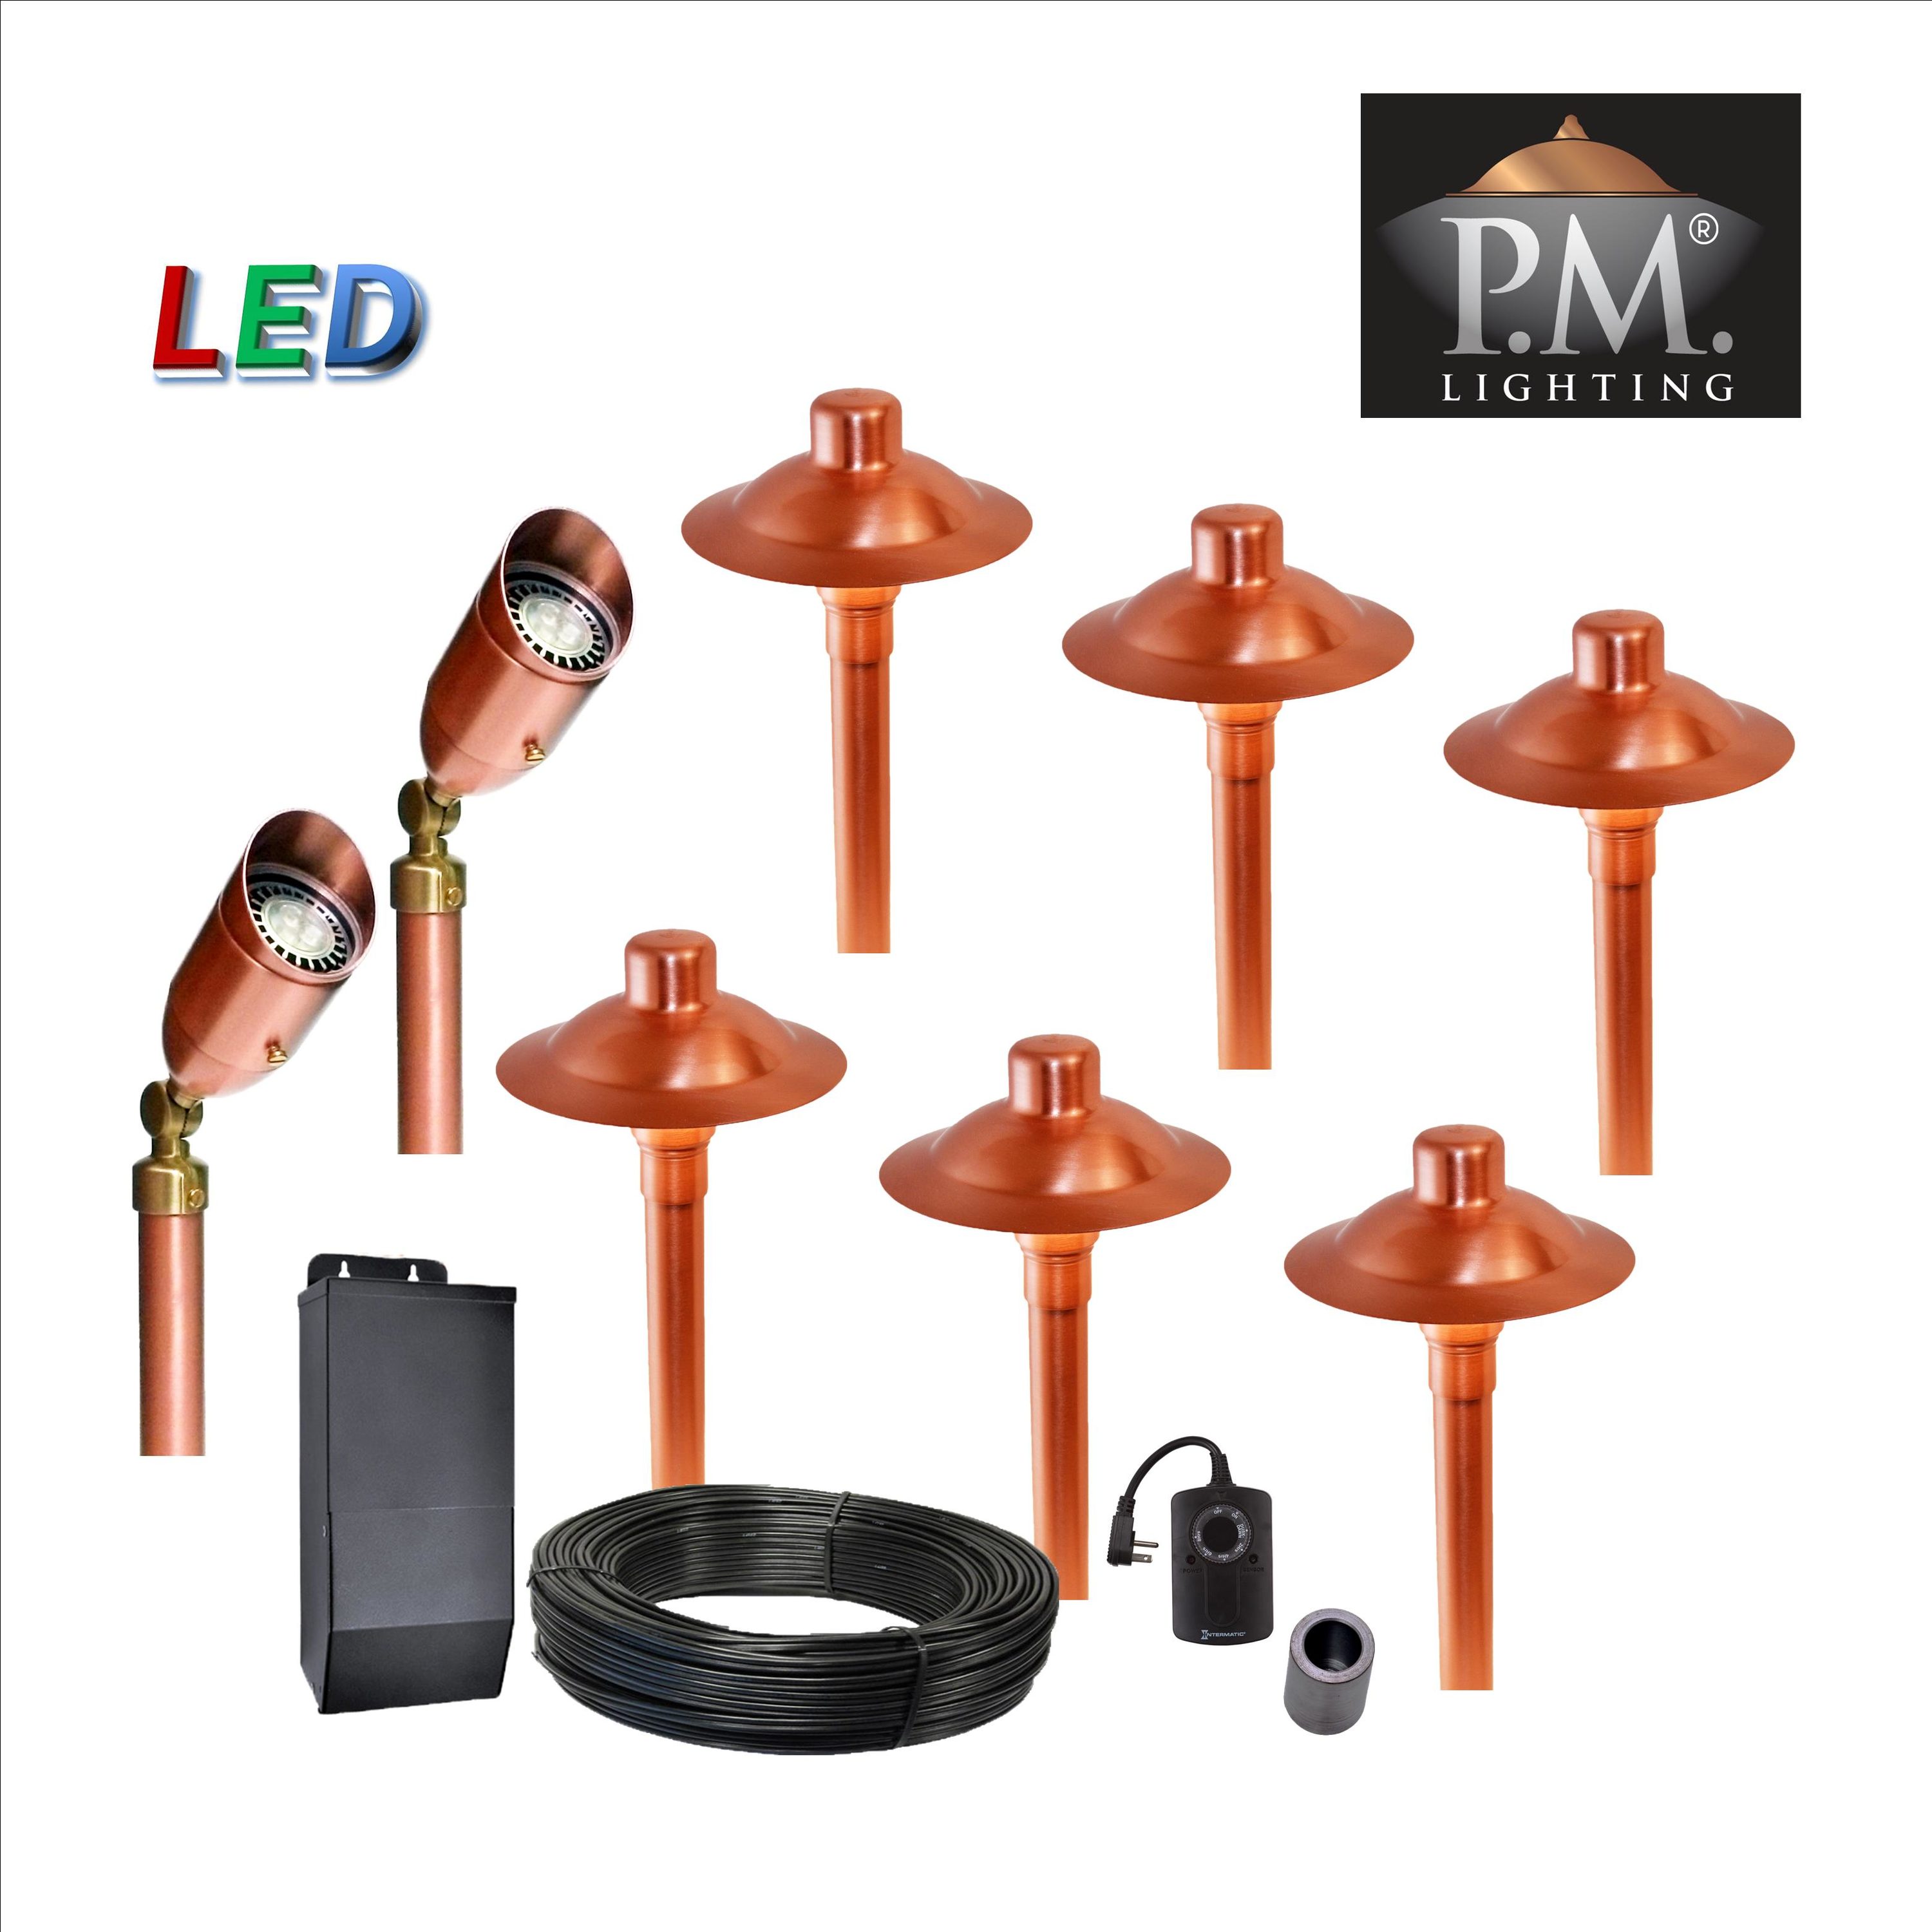 P.M. Lighting 8-Pack 200-Lumen 28-Watt Copper Satin Low Voltage Hardwired LED Outdoor Path Light (2800 K) the Path department at